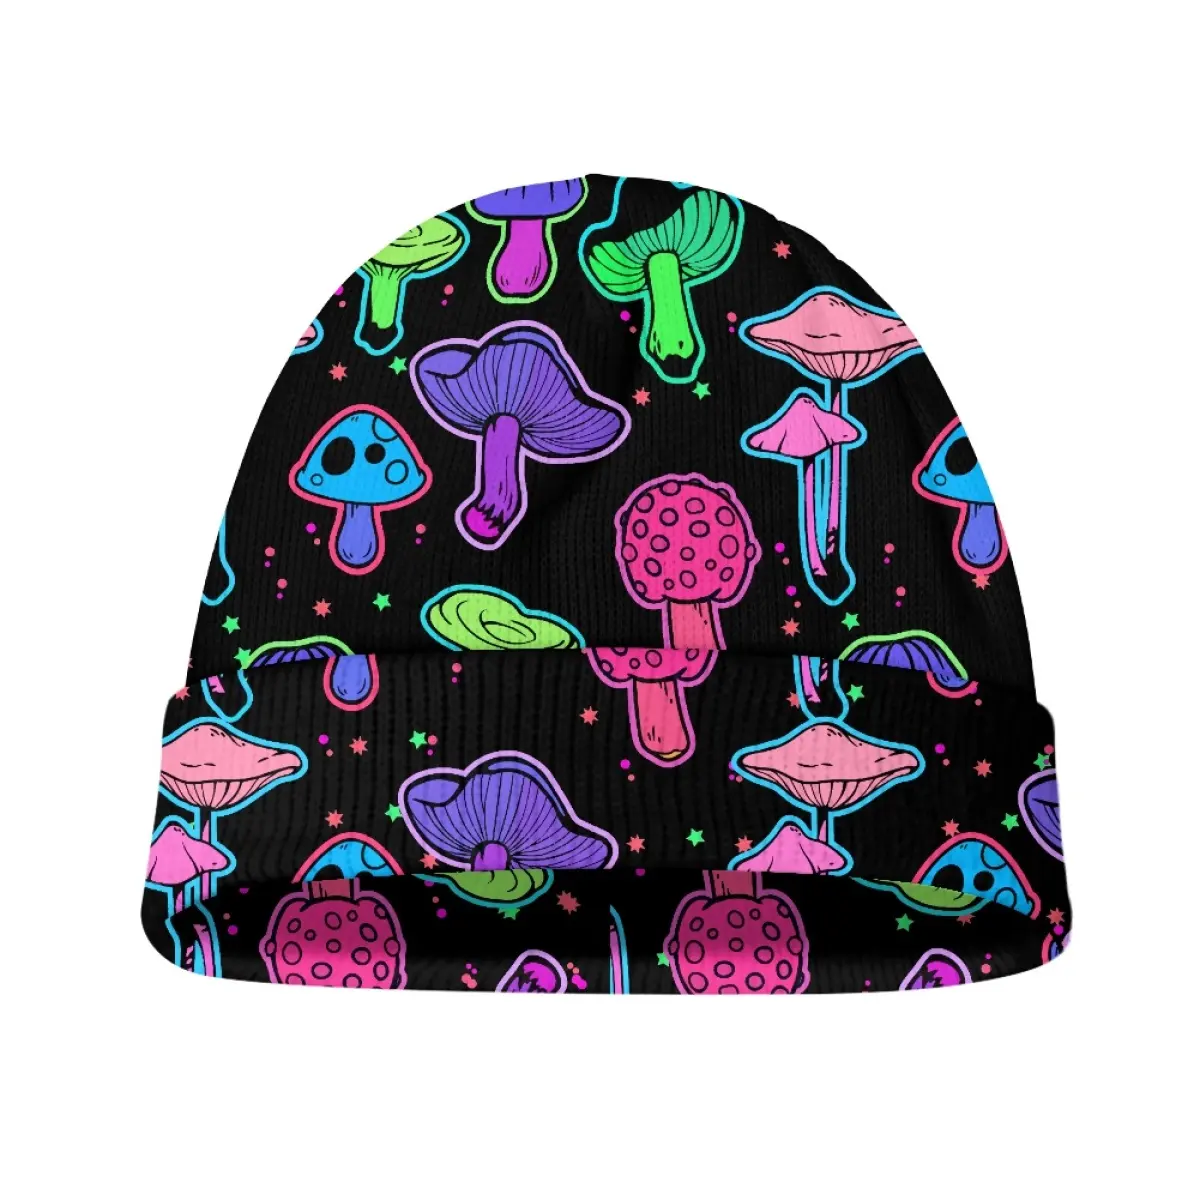 Psychedelic Plant Mushroom Print Kids Knitted Hat Outdoor Leisure Travel Warm Cold Hat Print on Demand Fall Winter Hat Atacado